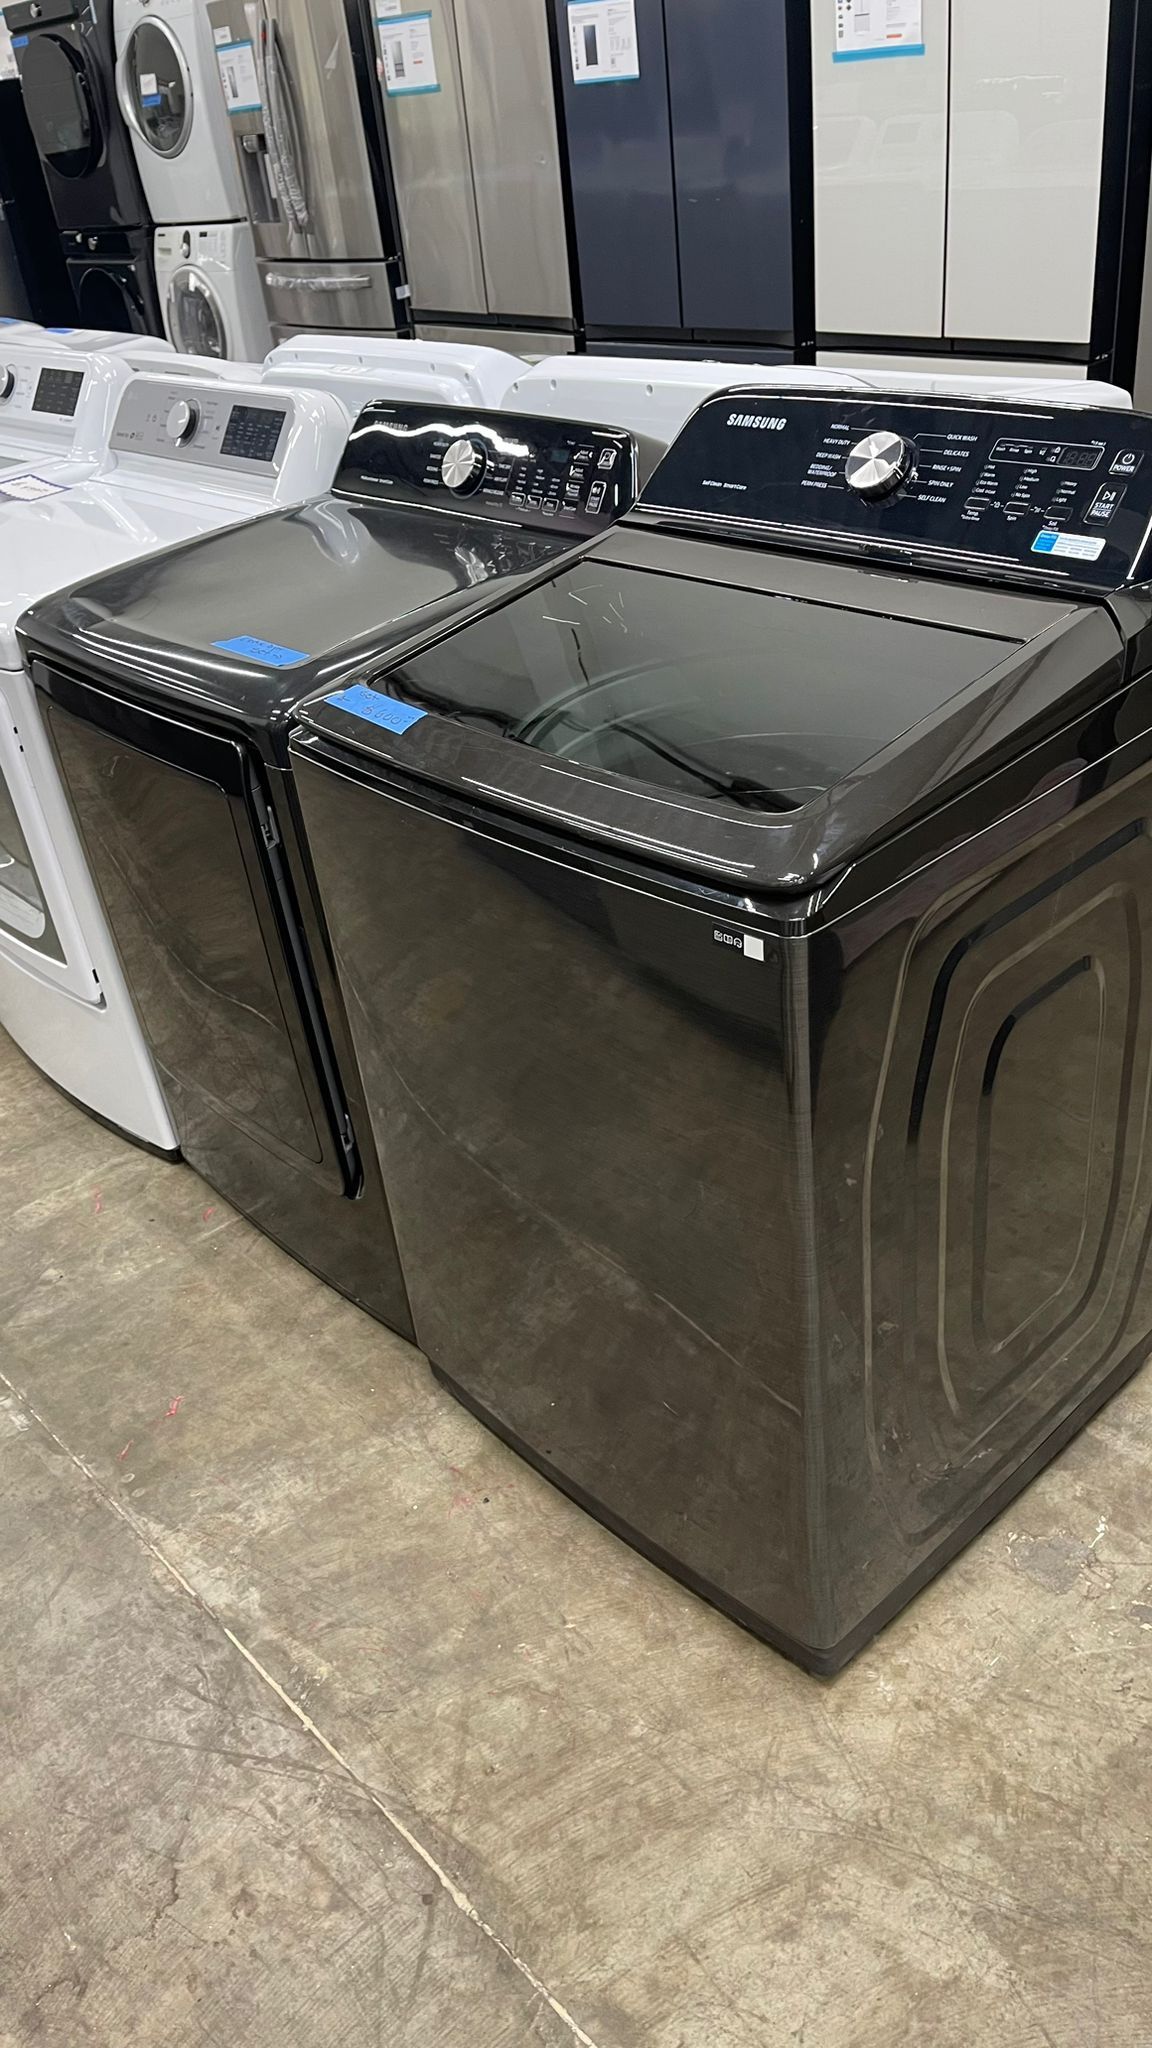 Top Load Washer And Electric Dryer Price Start At $450 And Up With 4 Months Warranty 